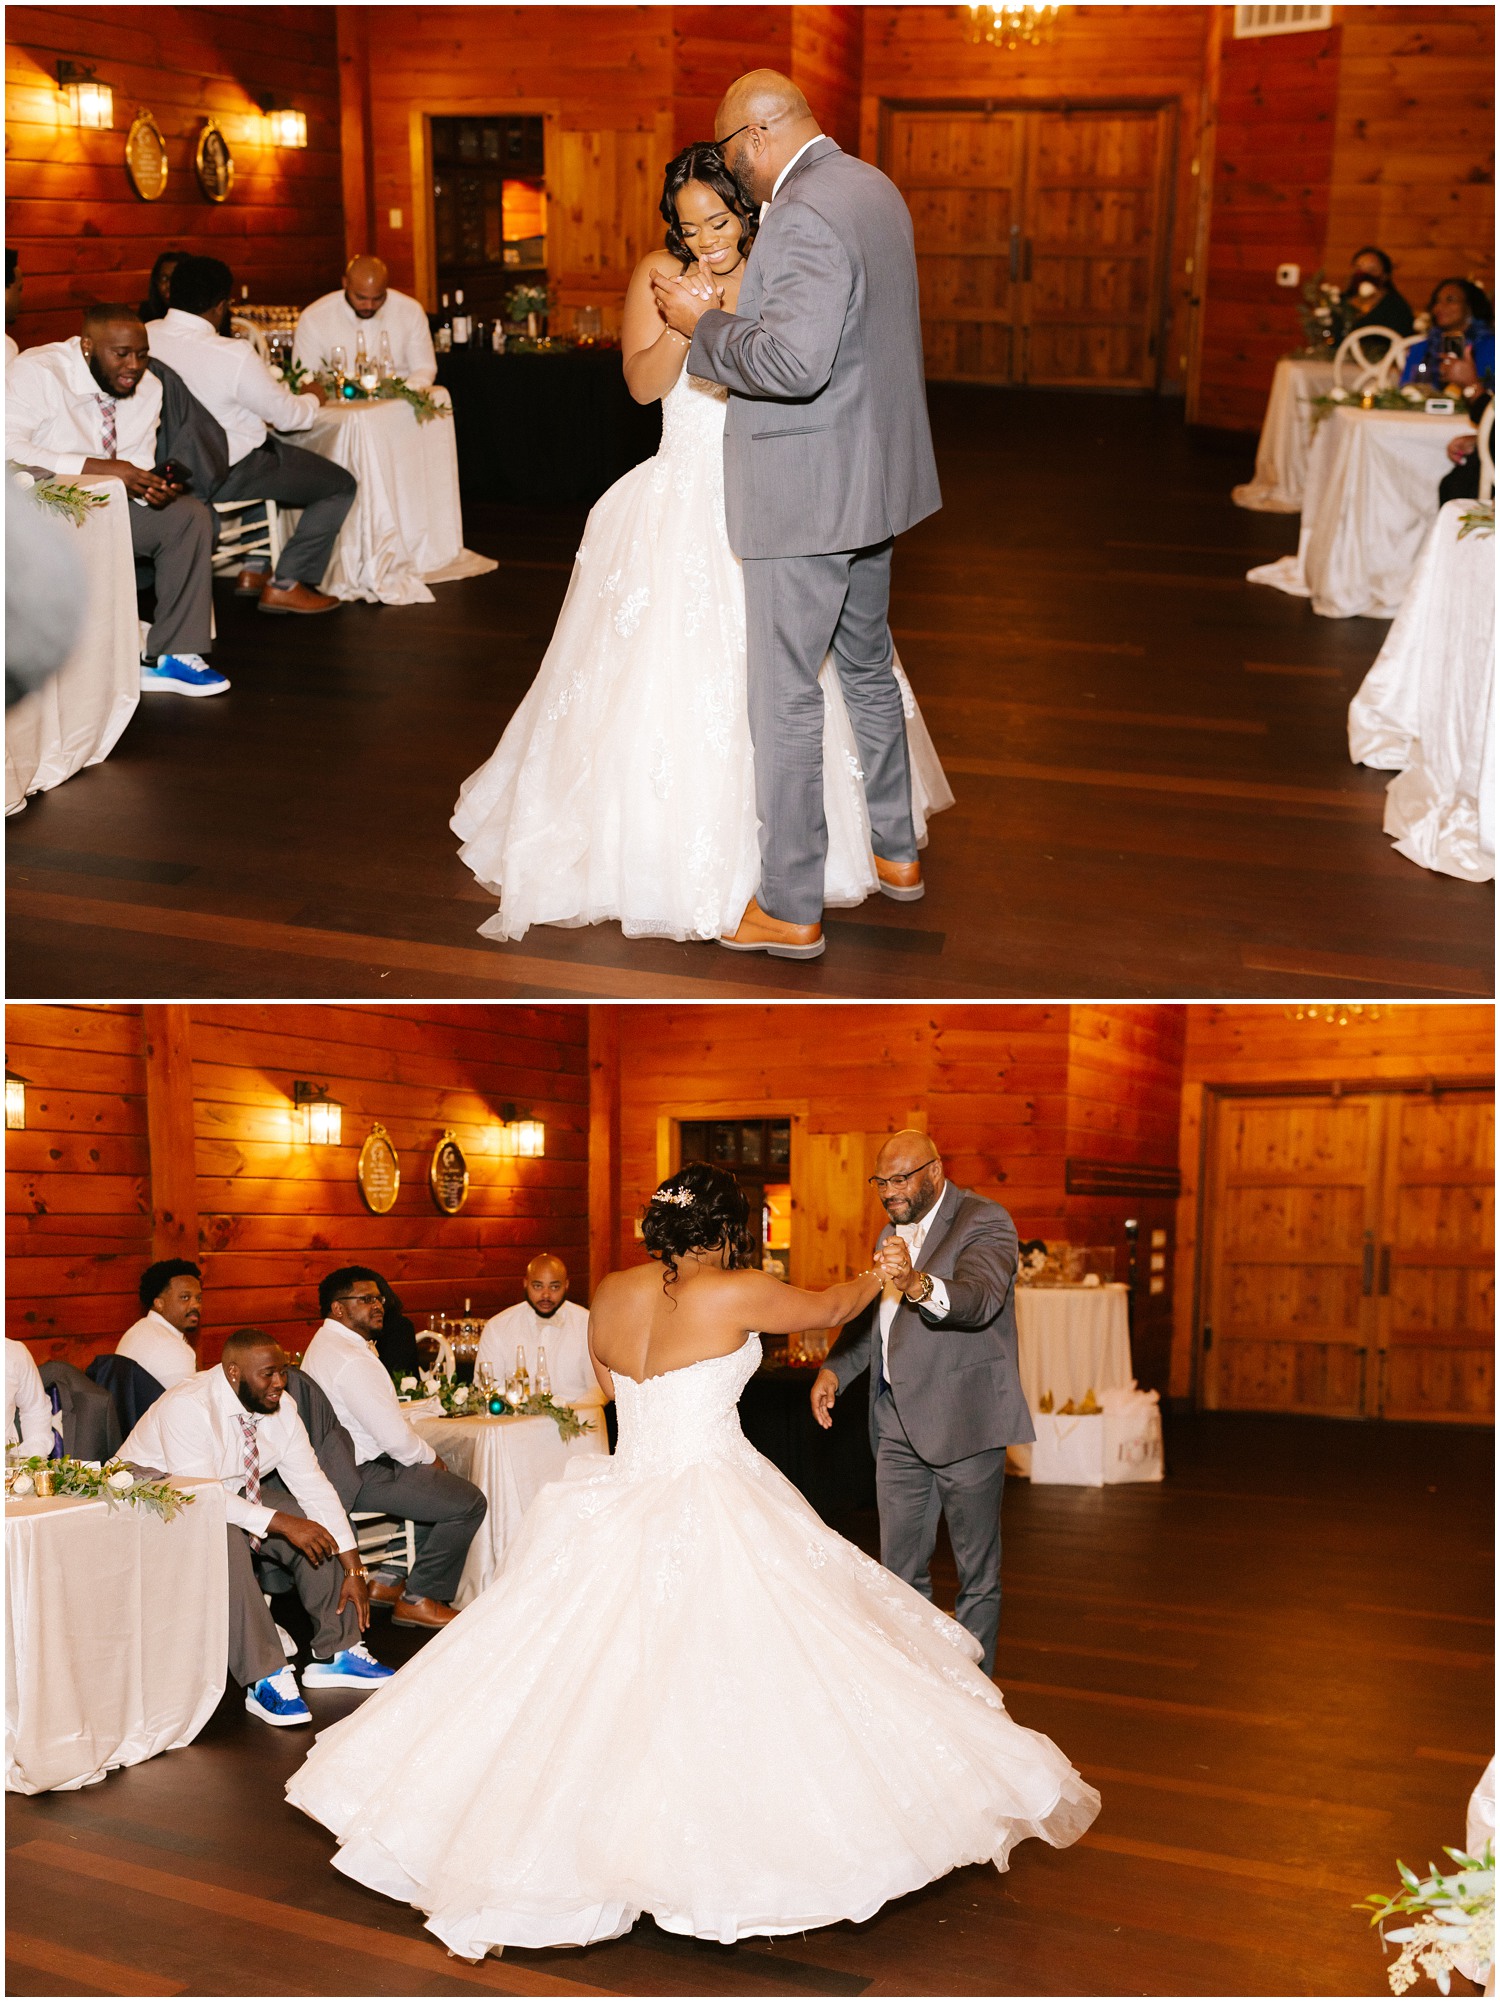 Bride dances with her father on her wedding day in Raleigh, NC.